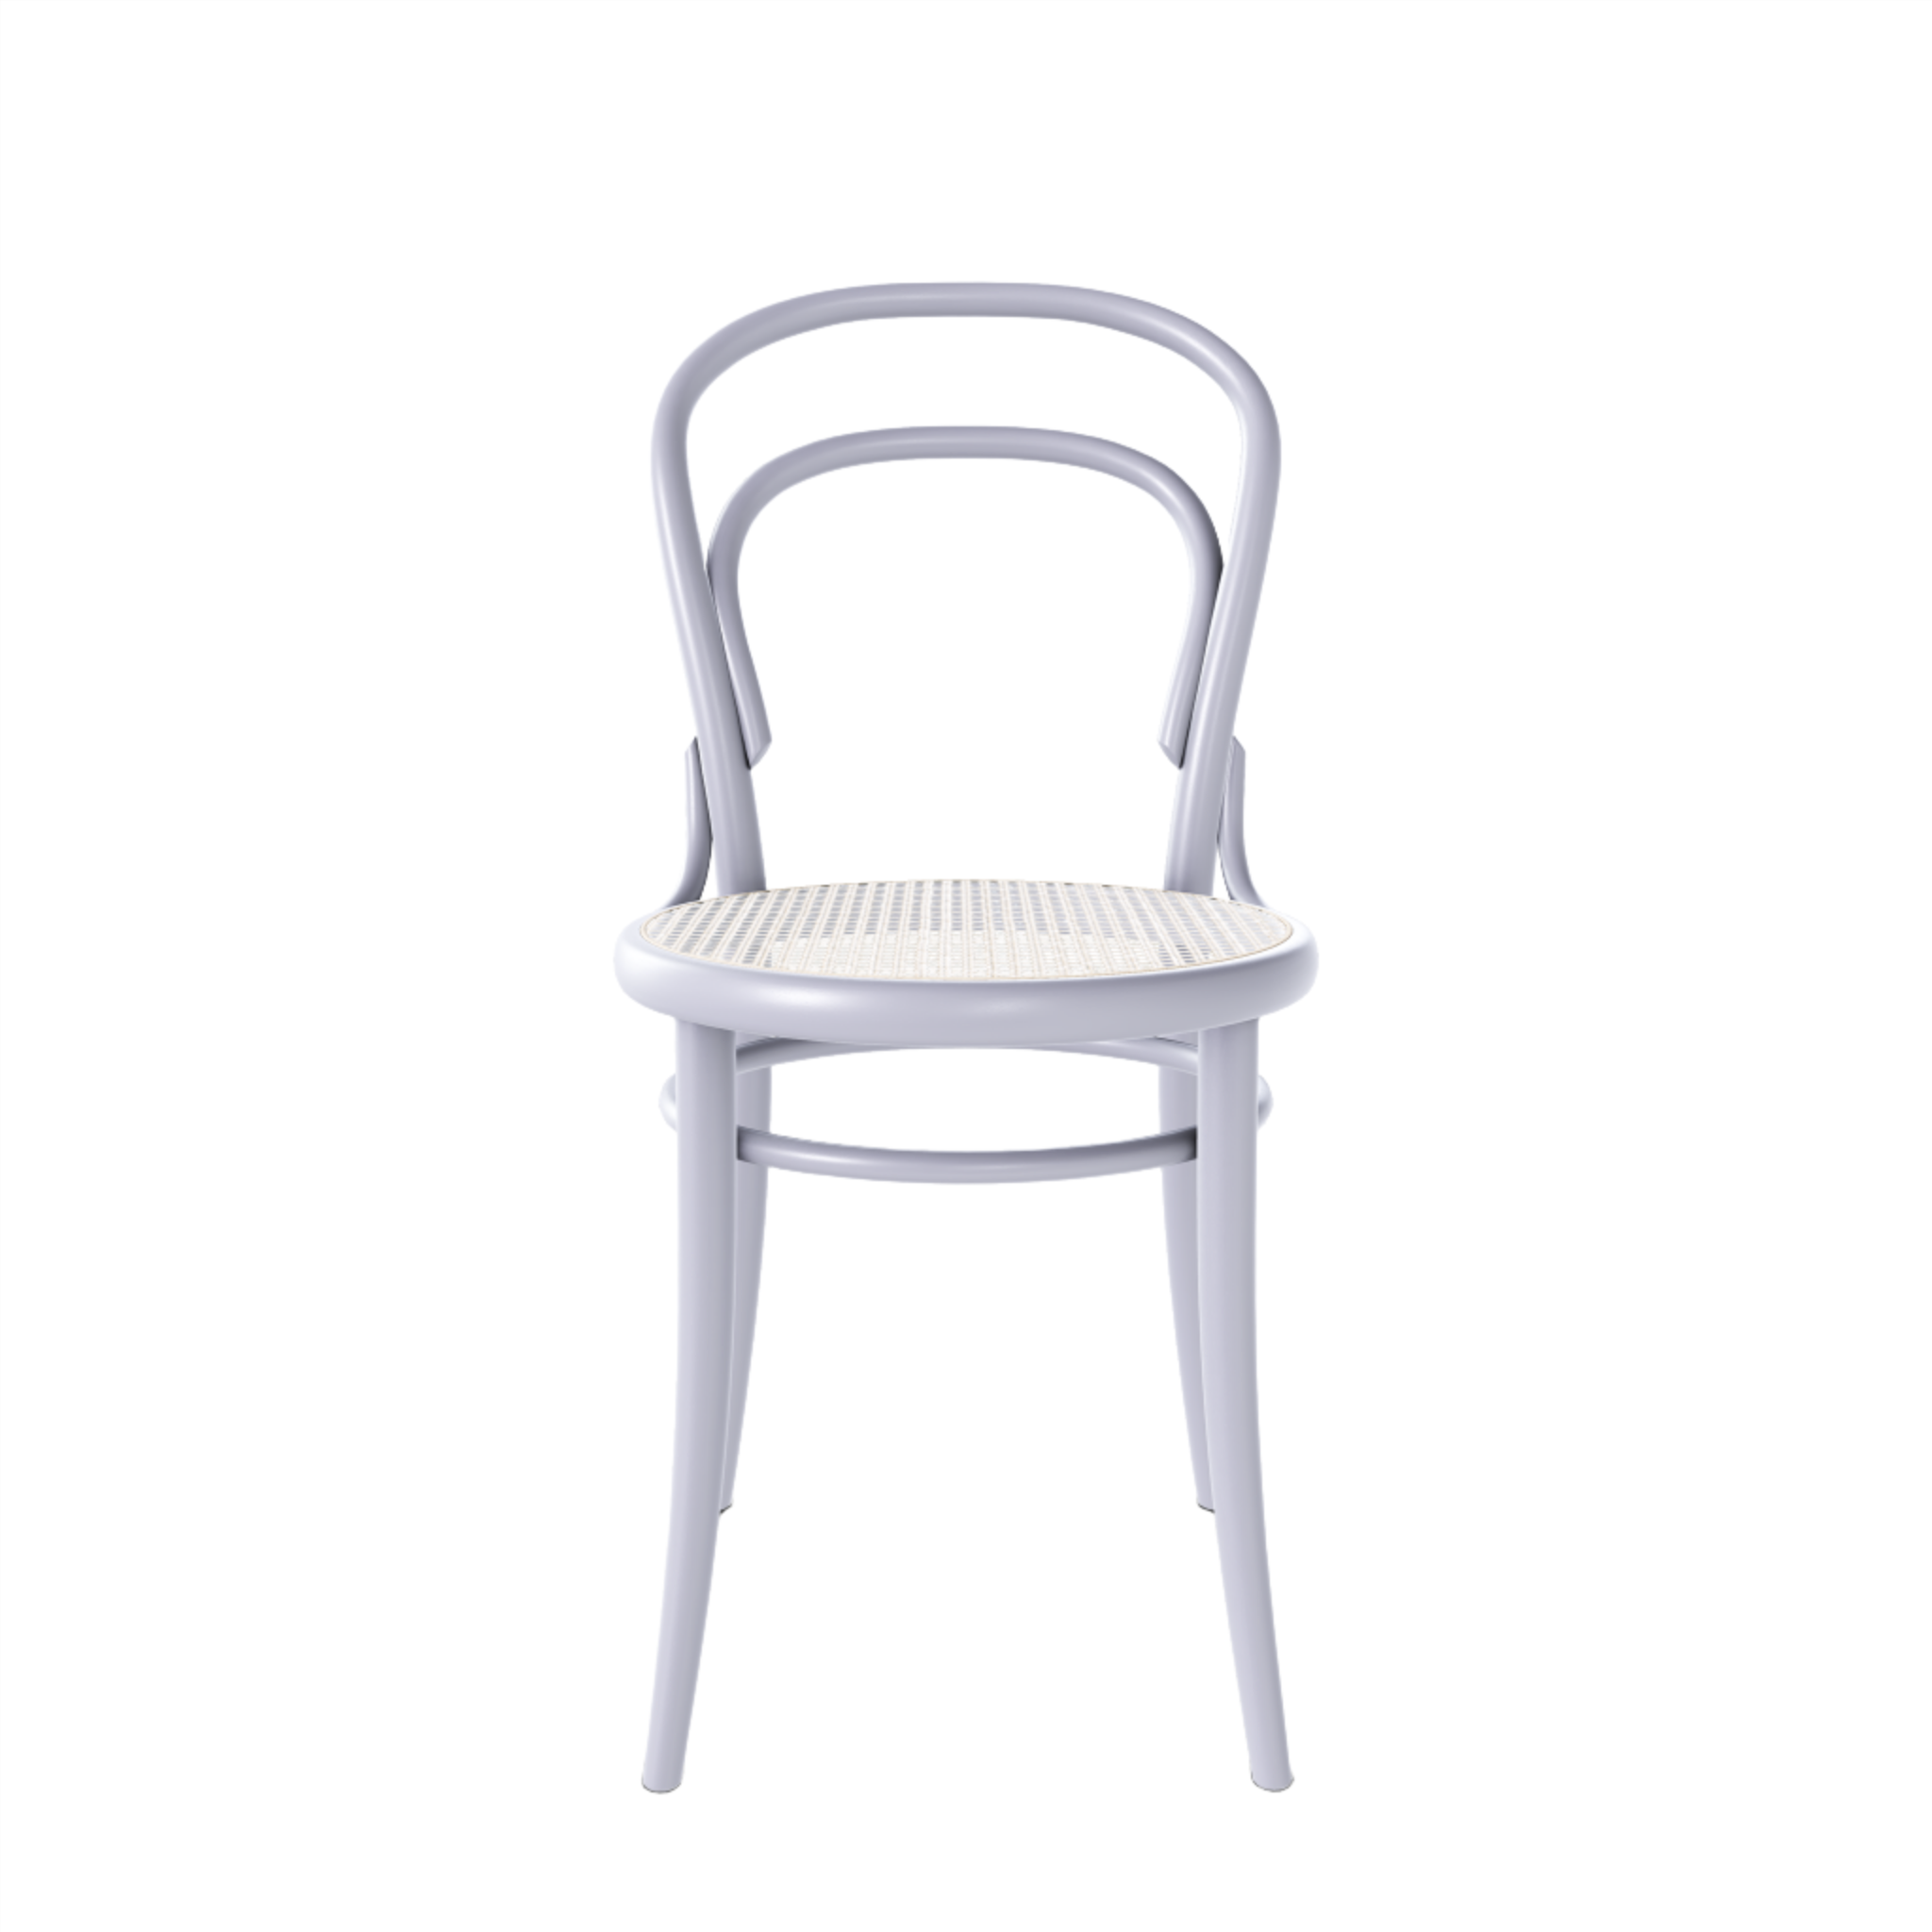 Ton 14 Dining Chair with cane seat in moon grey